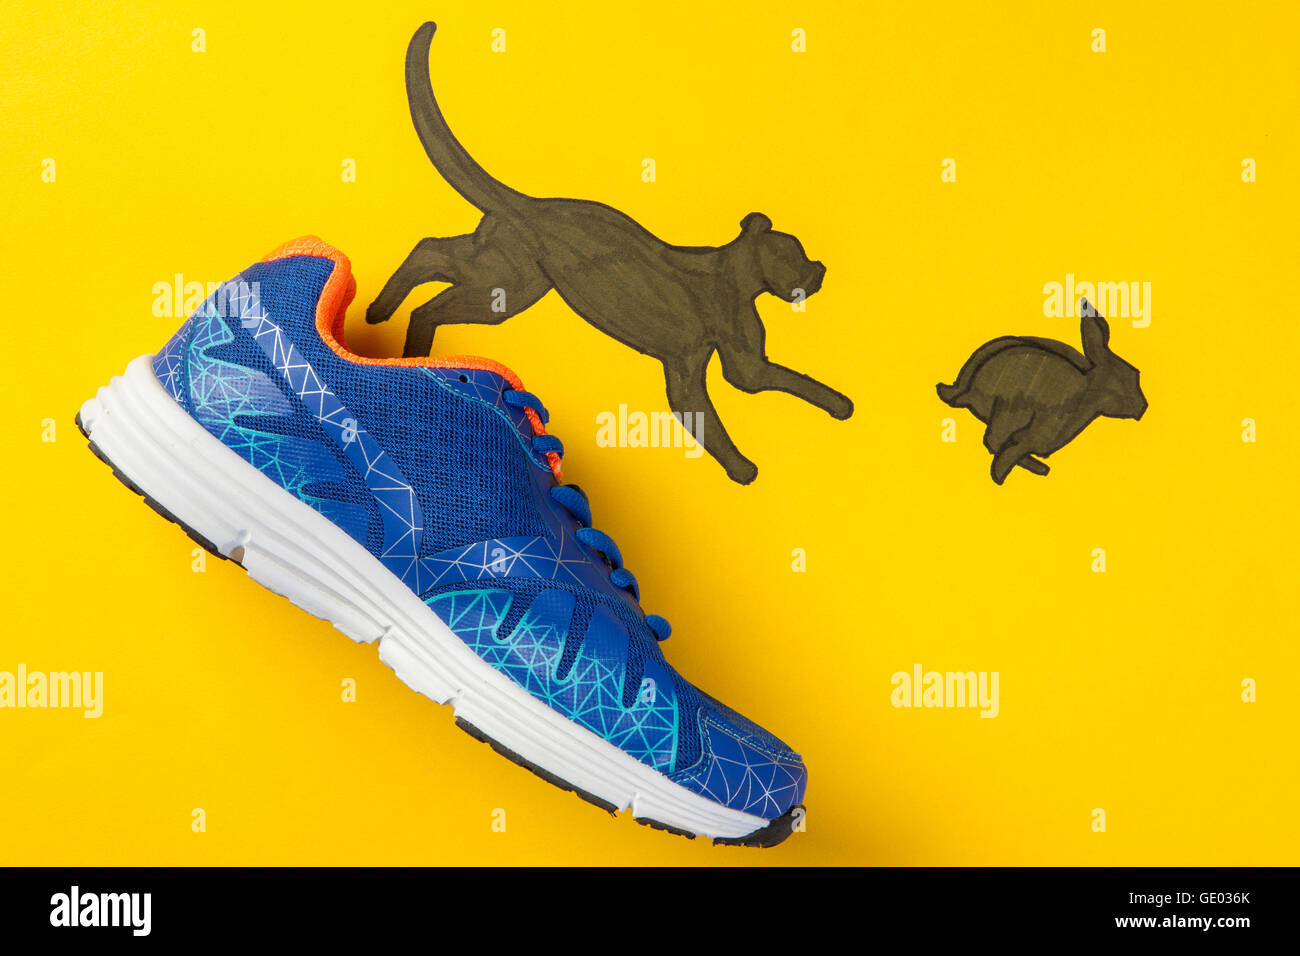 Illustration of a hunting dog coming out of a sneaker and chasing a rabbit Stock Photo